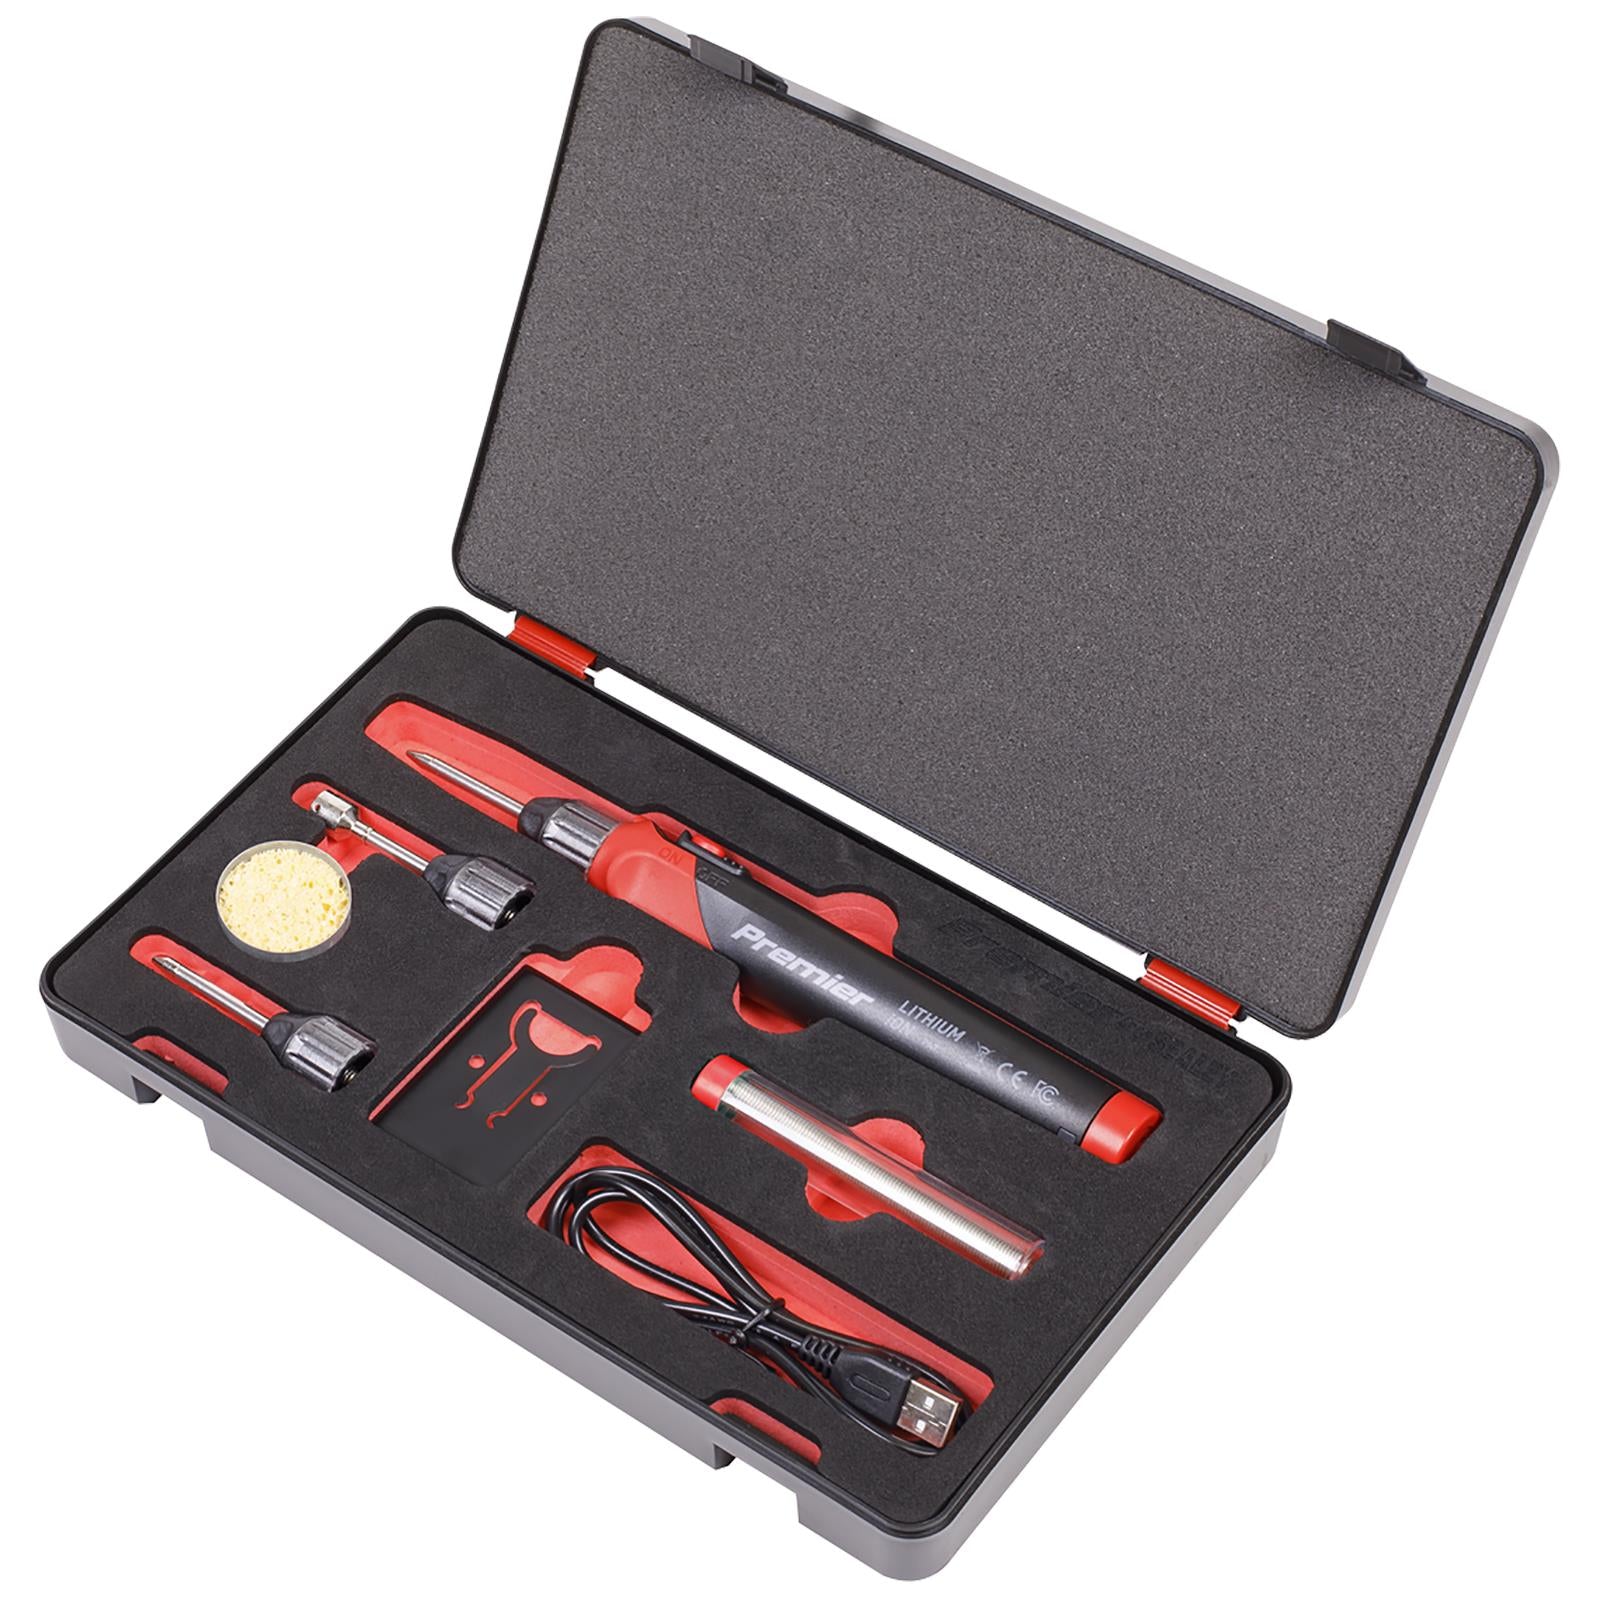 Sealey Premier Soldering Iron Kit Rechargeable Lithium-ion 30W